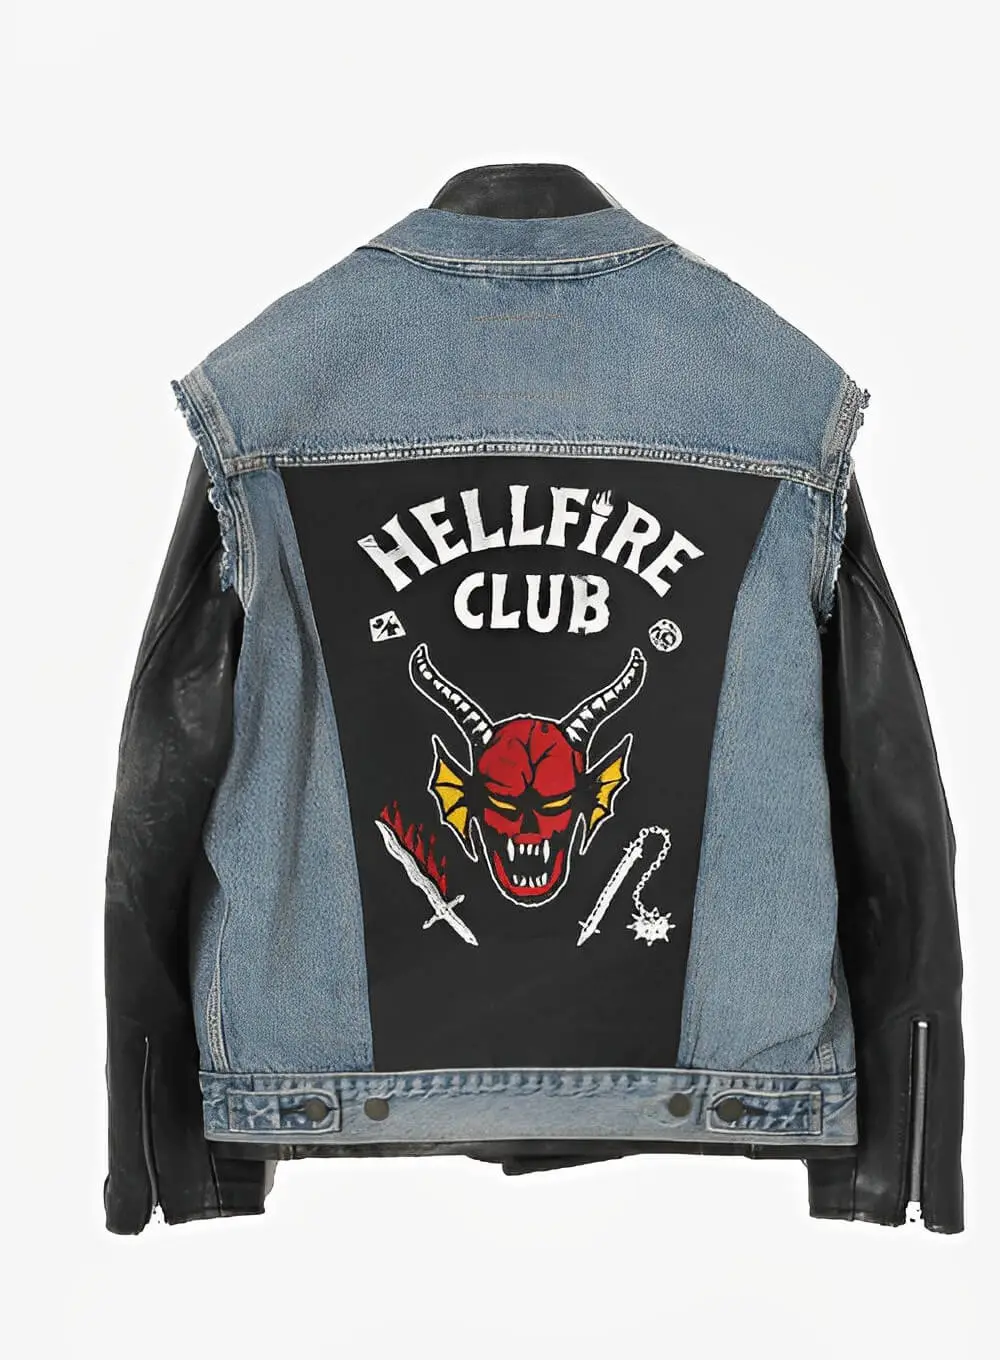 Hellfire Club Jacket - Stranger Things Outfits